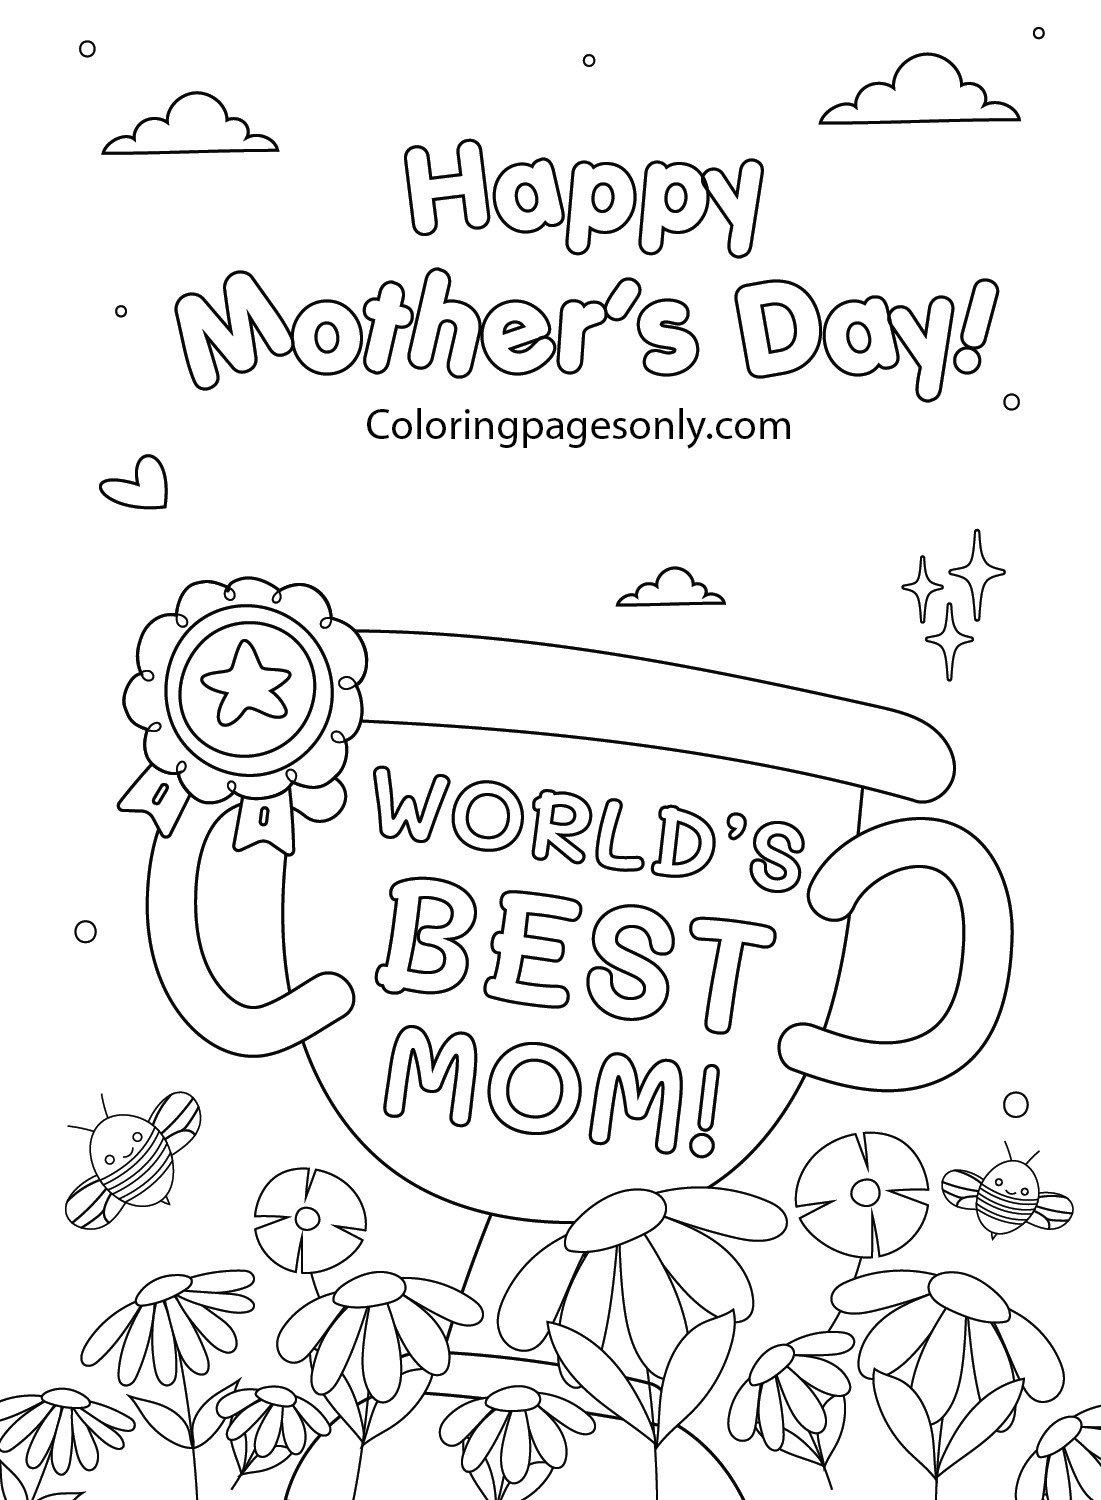 Coloring Pages For Kids And Adults